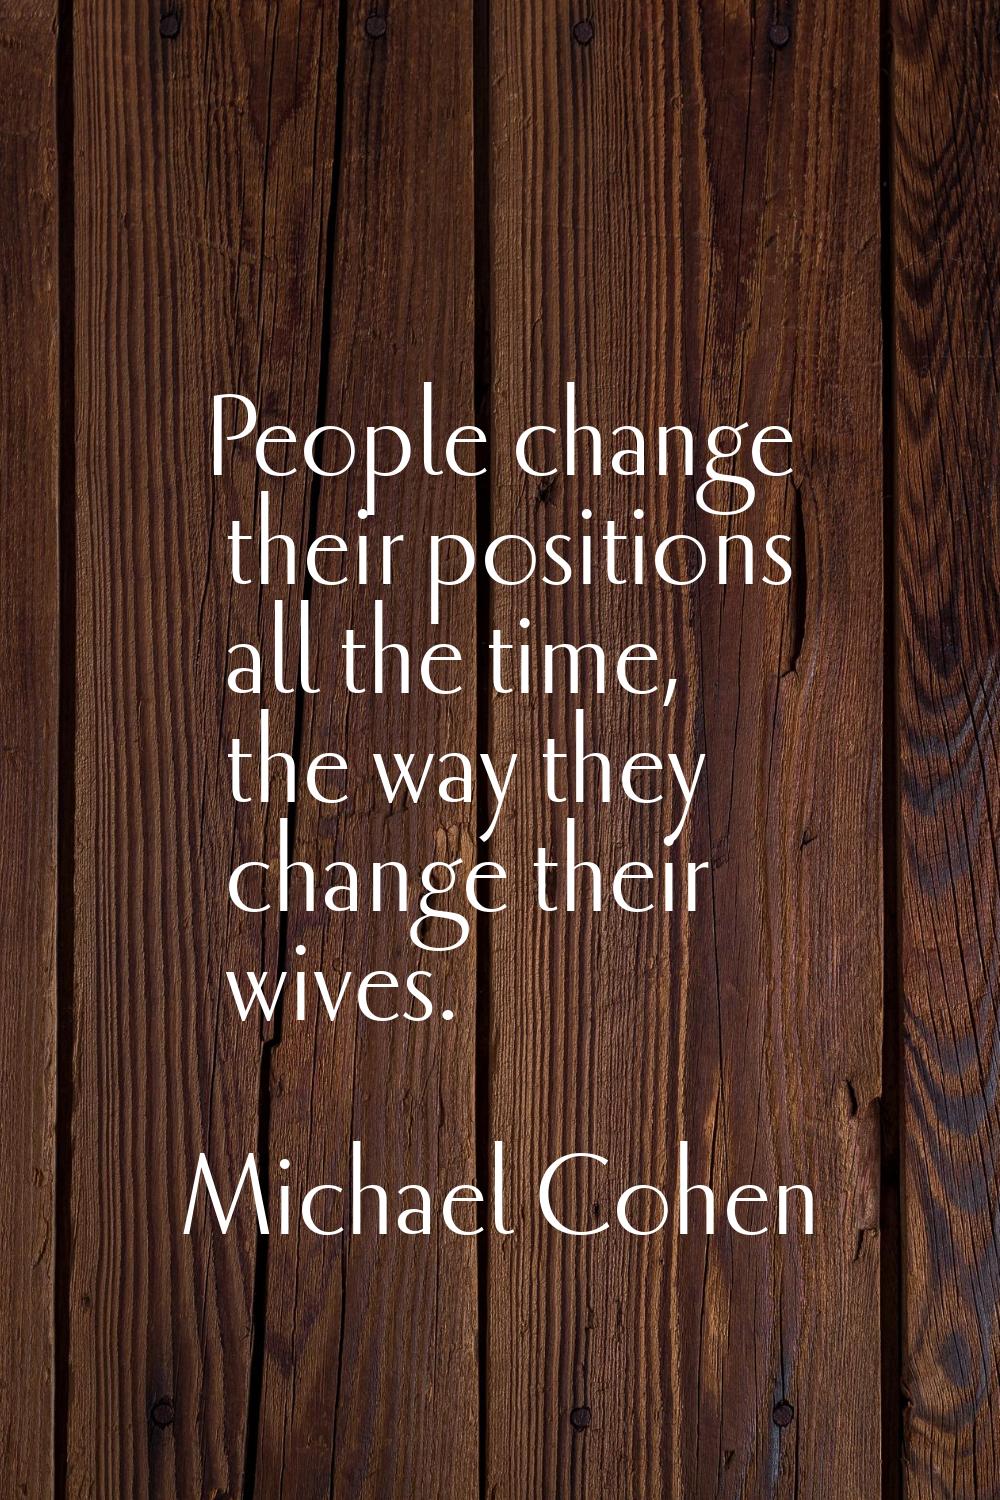 People change their positions all the time, the way they change their wives.